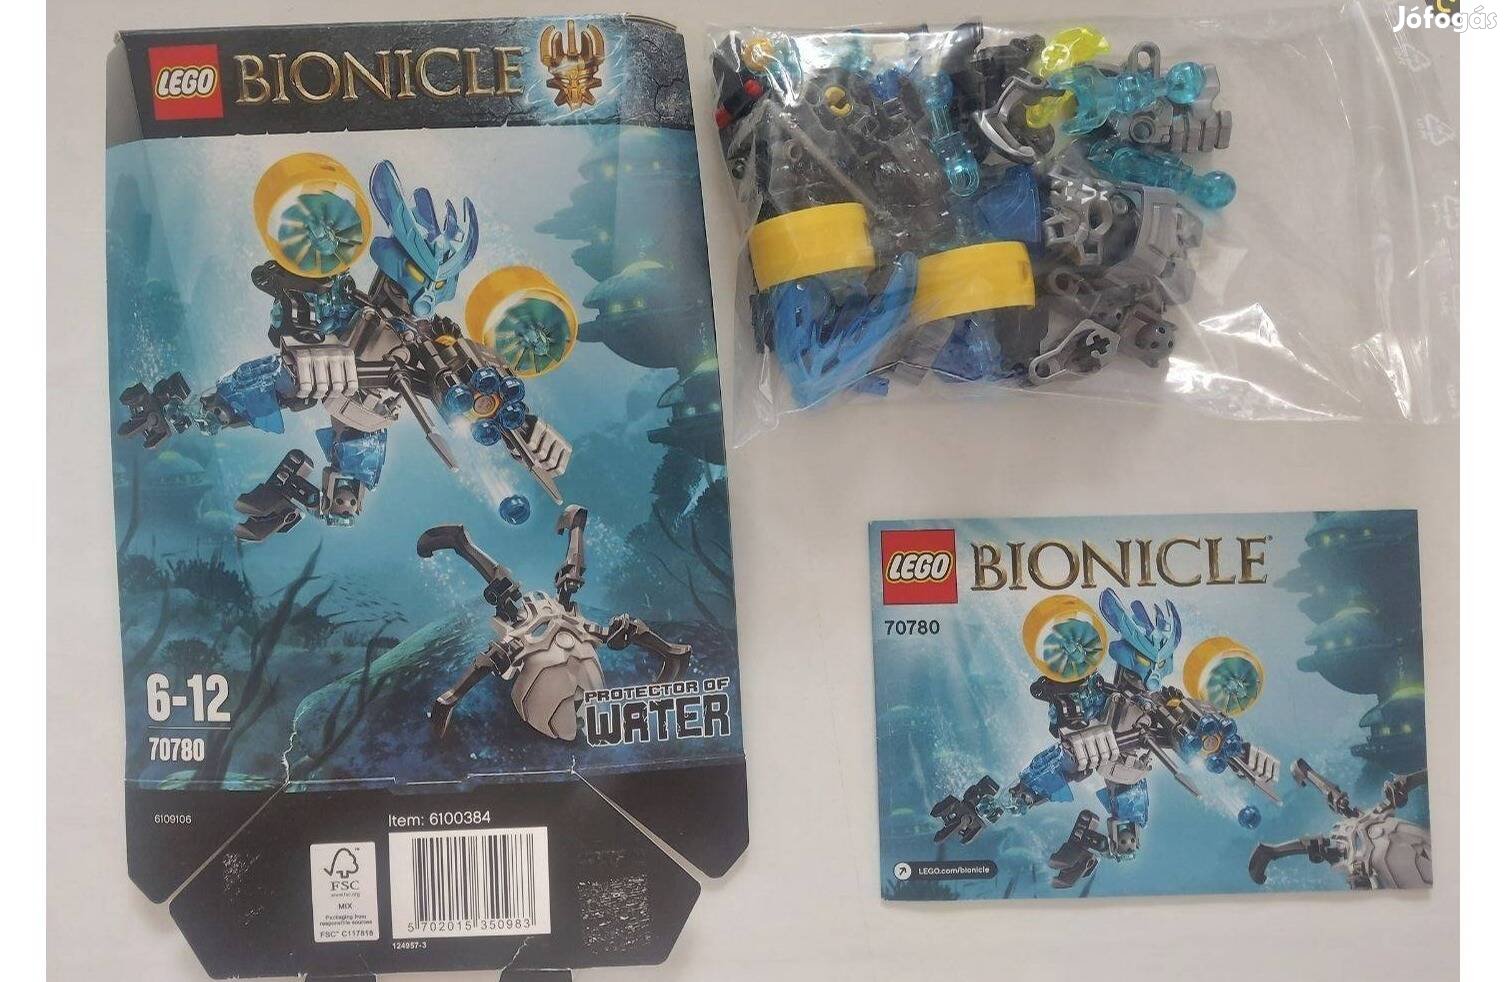 Lego Bionicle - Protector of Water (70780)